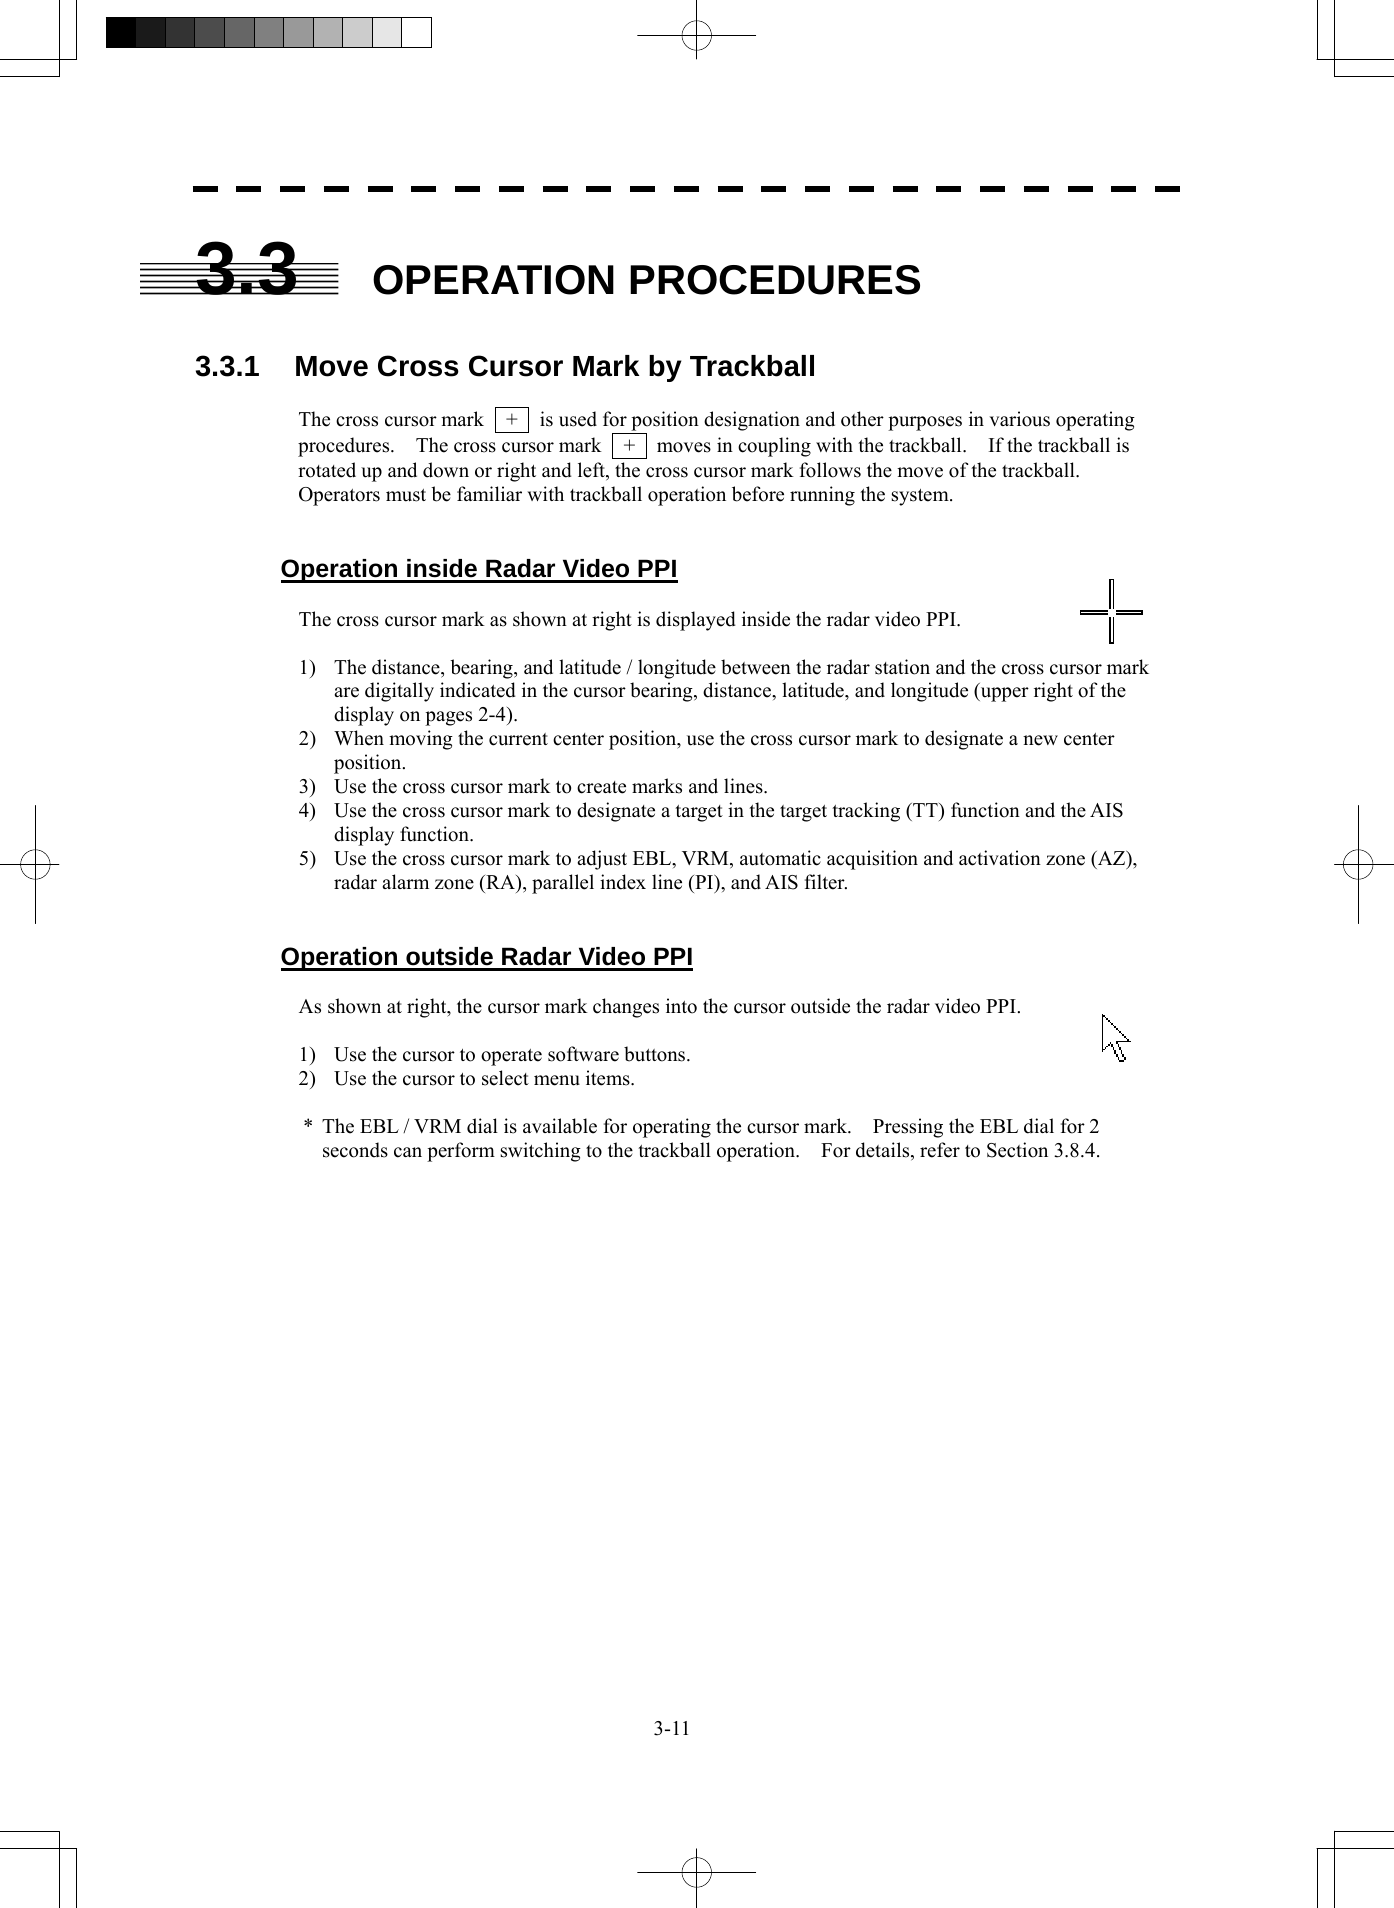  3-11 3.3  OPERATION PROCEDURES  3.3.1  Move Cross Cursor Mark by Trackball  The cross cursor mark    +    is used for position designation and other purposes in various operating procedures.    The cross cursor mark    +    moves in coupling with the trackball.    If the trackball is rotated up and down or right and left, the cross cursor mark follows the move of the trackball. Operators must be familiar with trackball operation before running the system.   Operation inside Radar Video PPI  The cross cursor mark as shown at right is displayed inside the radar video PPI.  1)  The distance, bearing, and latitude / longitude between the radar station and the cross cursor mark are digitally indicated in the cursor bearing, distance, latitude, and longitude (upper right of the display on pages 2-4). 2)  When moving the current center position, use the cross cursor mark to designate a new center position. 3)  Use the cross cursor mark to create marks and lines. 4)  Use the cross cursor mark to designate a target in the target tracking (TT) function and the AIS display function. 5)  Use the cross cursor mark to adjust EBL, VRM, automatic acquisition and activation zone (AZ), radar alarm zone (RA), parallel index line (PI), and AIS filter.   Operation outside Radar Video PPI  As shown at right, the cursor mark changes into the cursor outside the radar video PPI.  1)  Use the cursor to operate software buttons. 2)  Use the cursor to select menu items.  *  The EBL / VRM dial is available for operating the cursor mark.    Pressing the EBL dial for 2 seconds can perform switching to the trackball operation.    For details, refer to Section 3.8.4.    